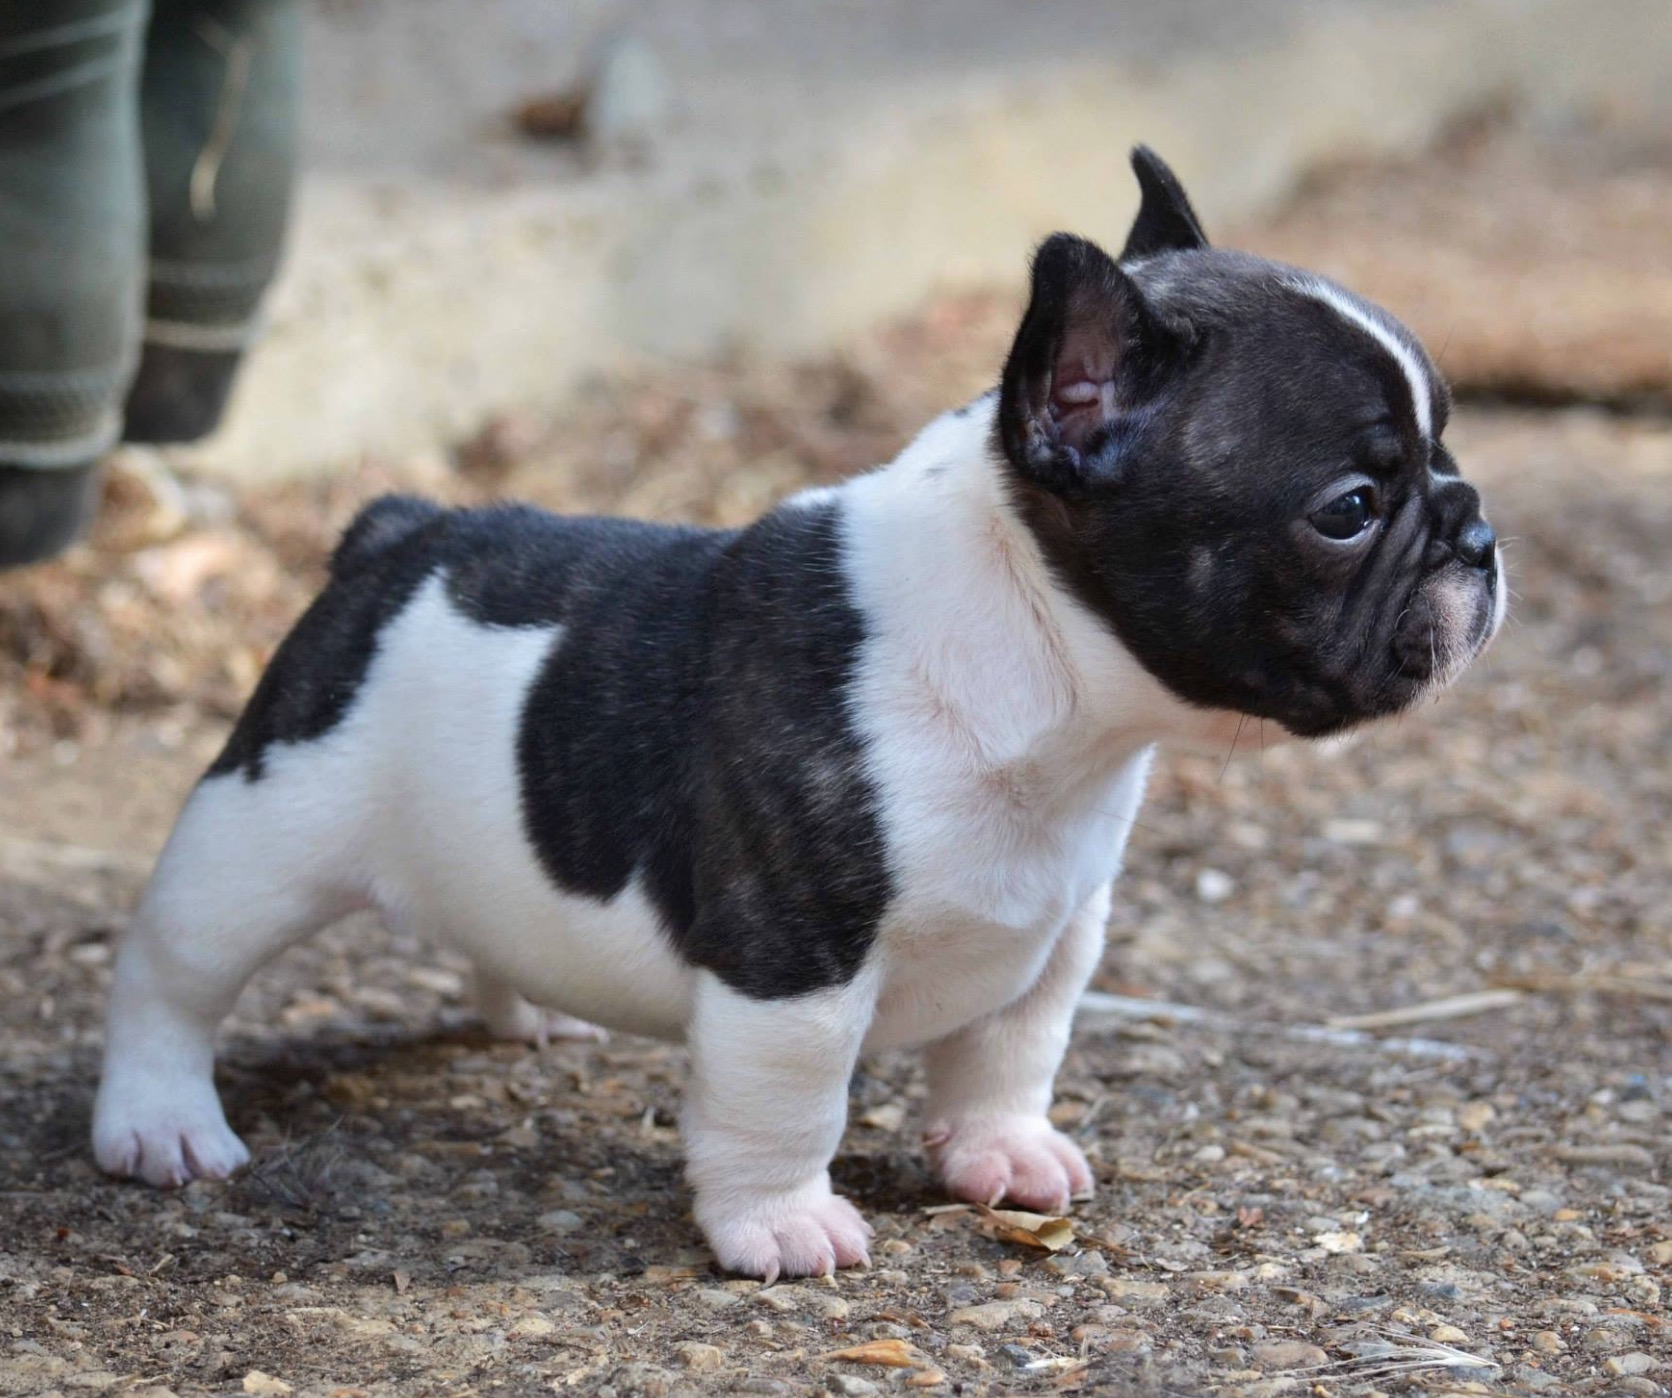 Can You Pass This Geography Quiz Where Every Question Comes With a 🐶 Dog-Related Clue? French Bulldog